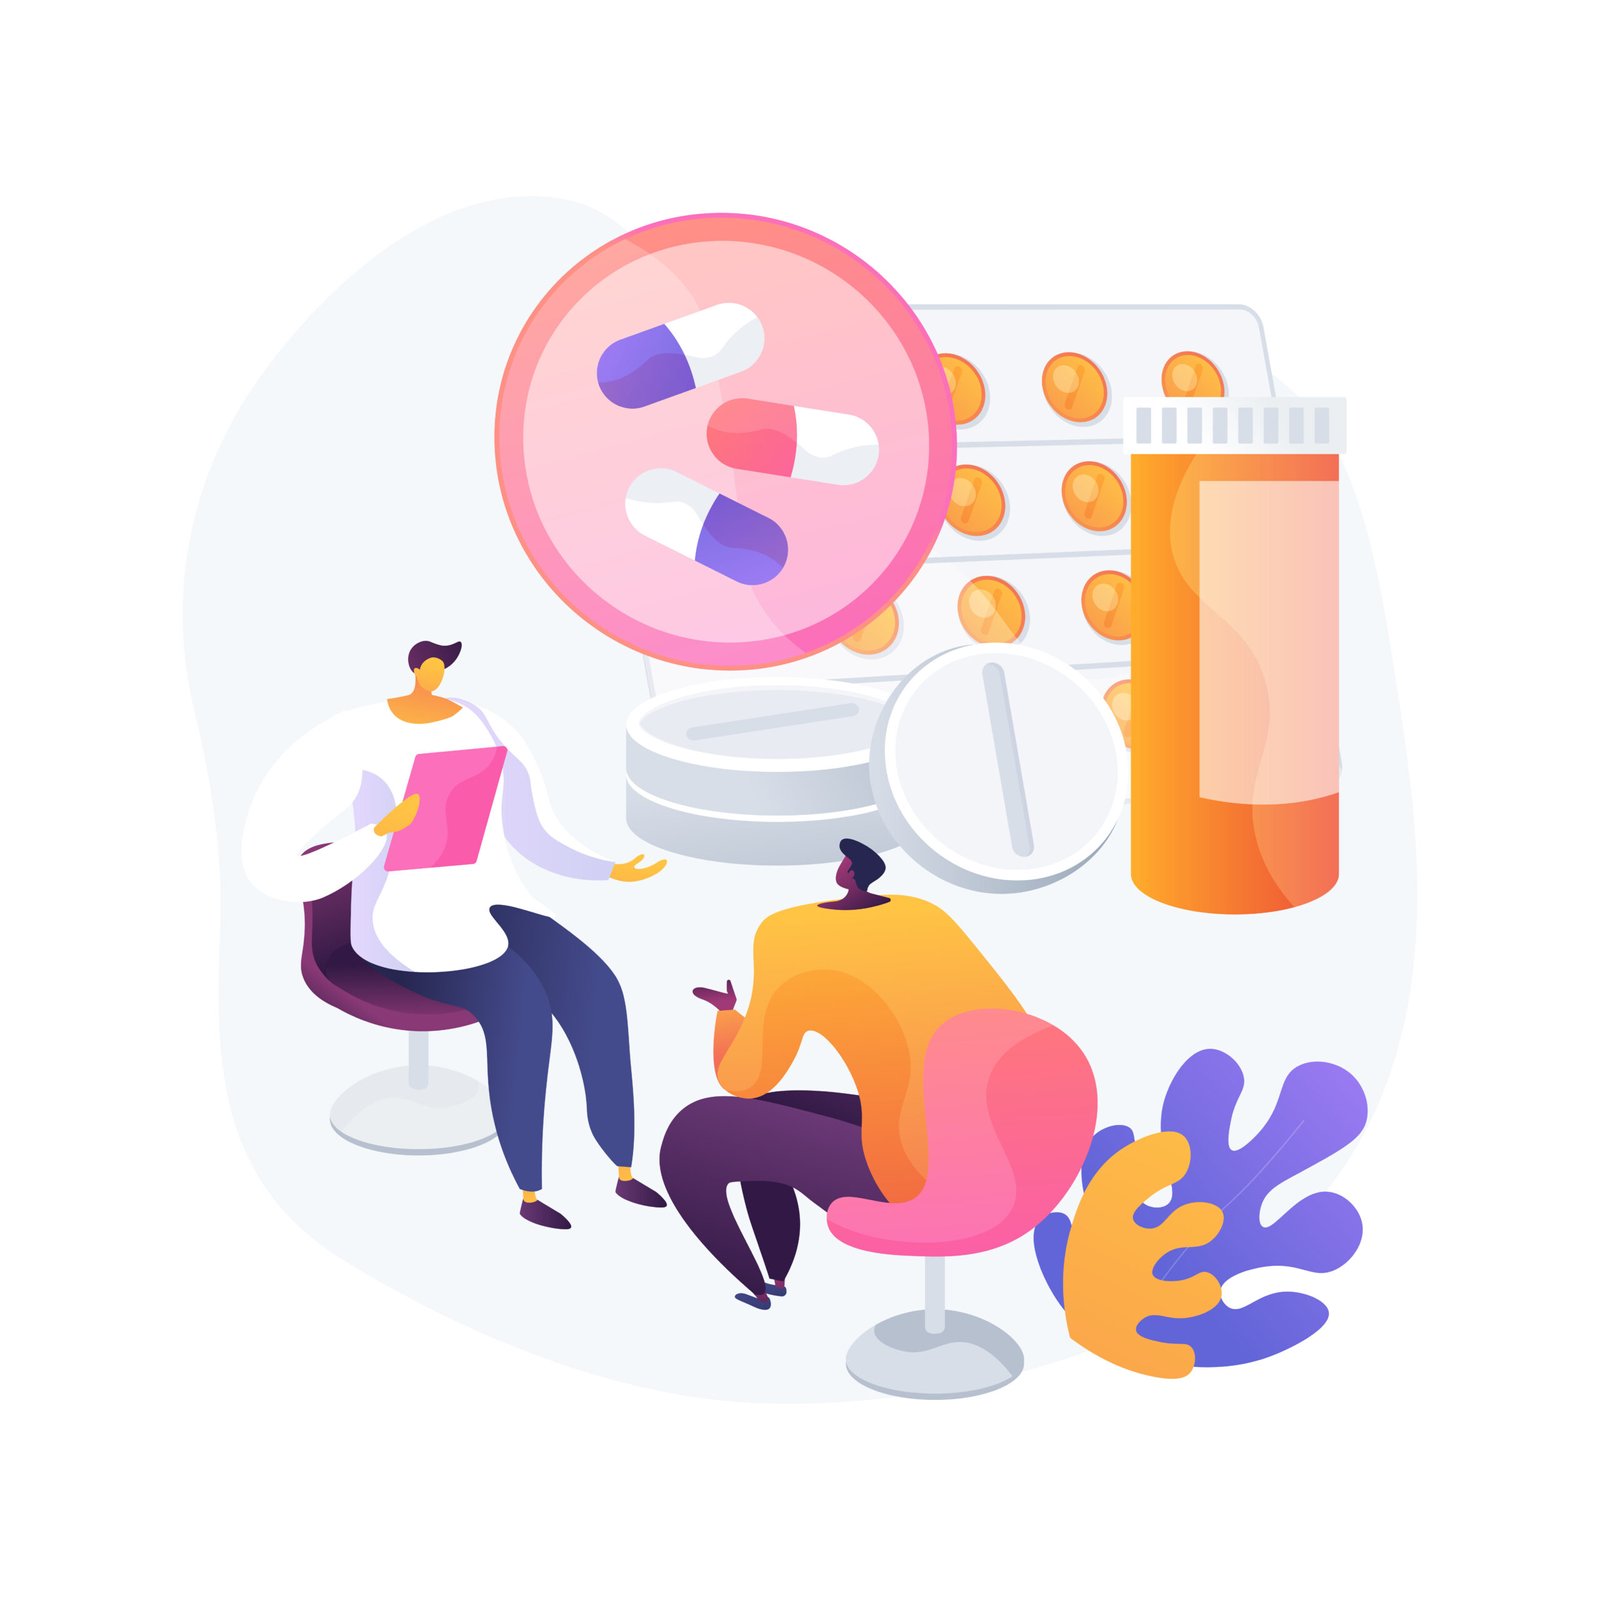 Drug monitoring abstract concept vector illustration. Therapeutic drug monitoring, primary healthcare, ankle bracelet, clinical chemistry, medication level measurement in blood abstract metaphor.